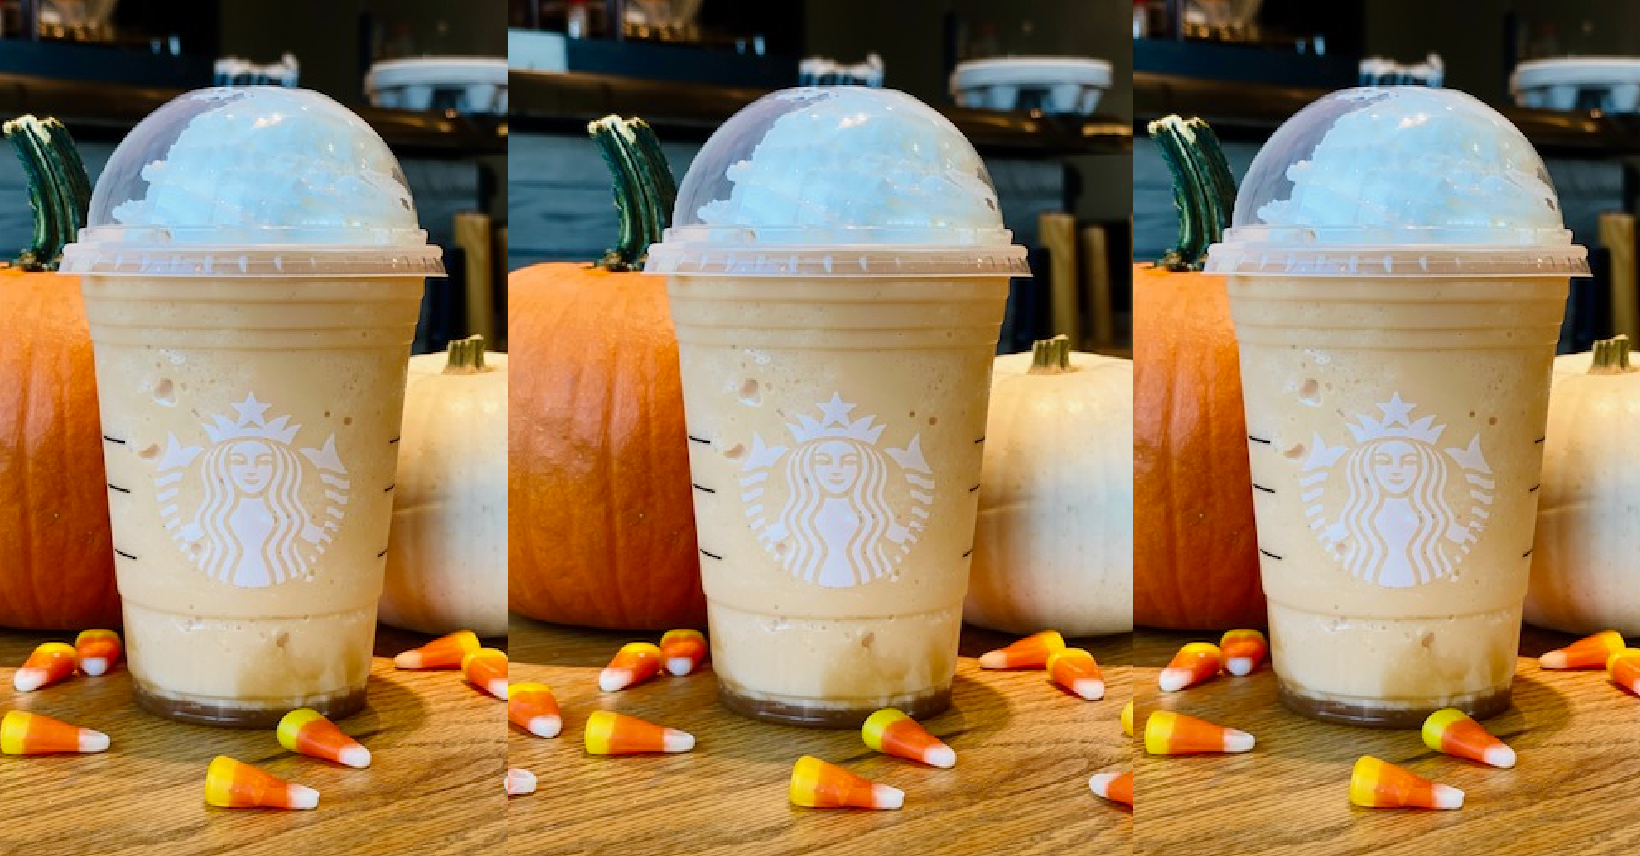 You Can Get A Candy Corn Frappuccino From Starbucks To Satisfy Your Sweet Tooth